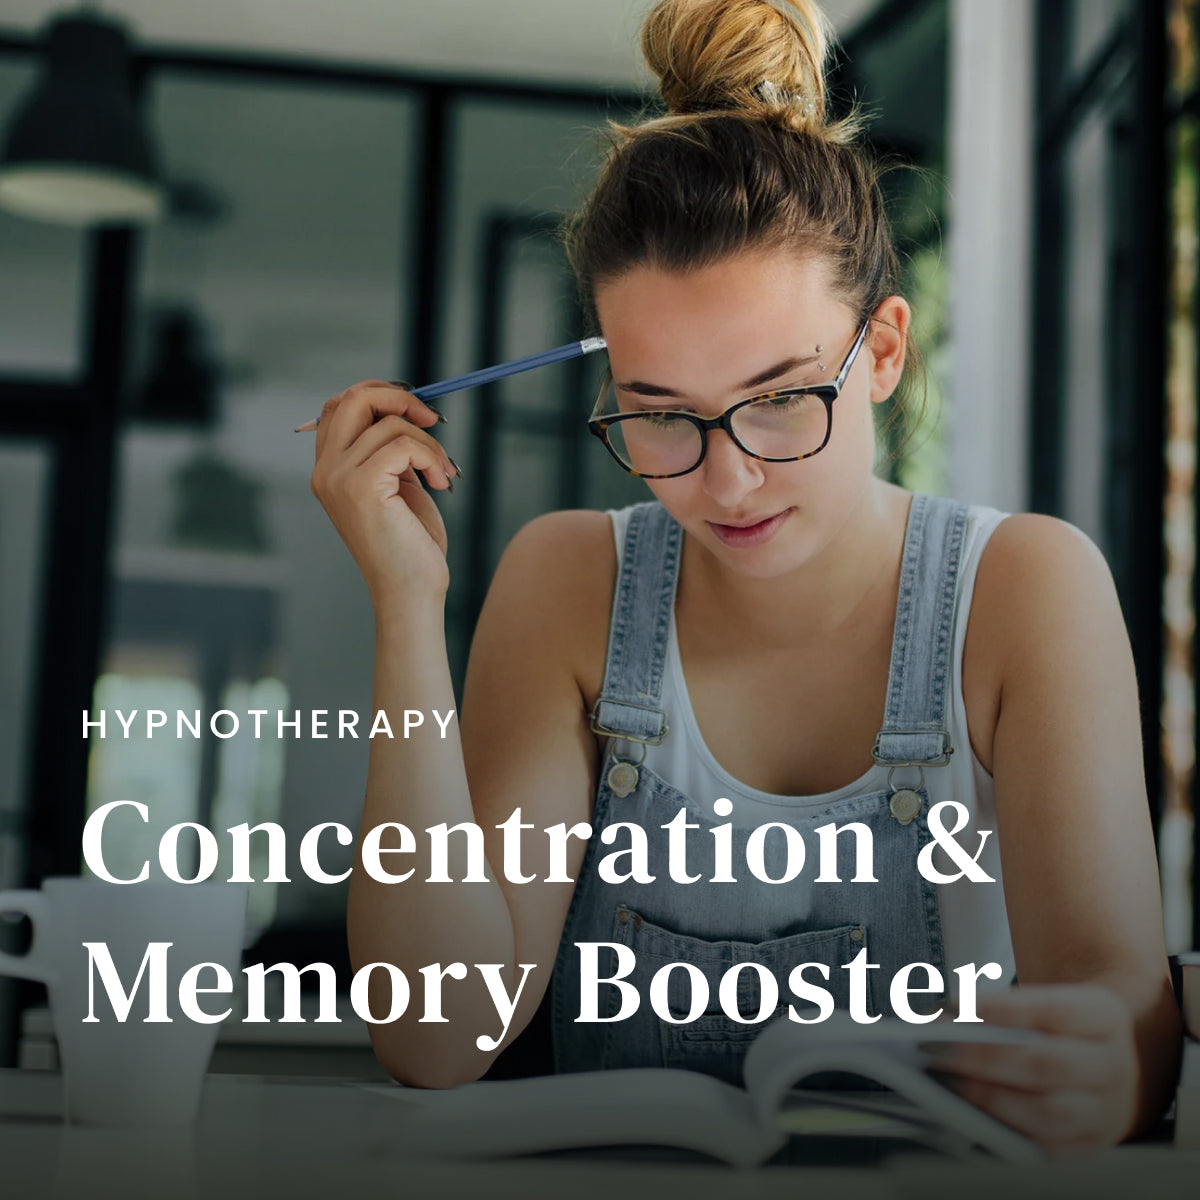 Concentration & Memory Booster